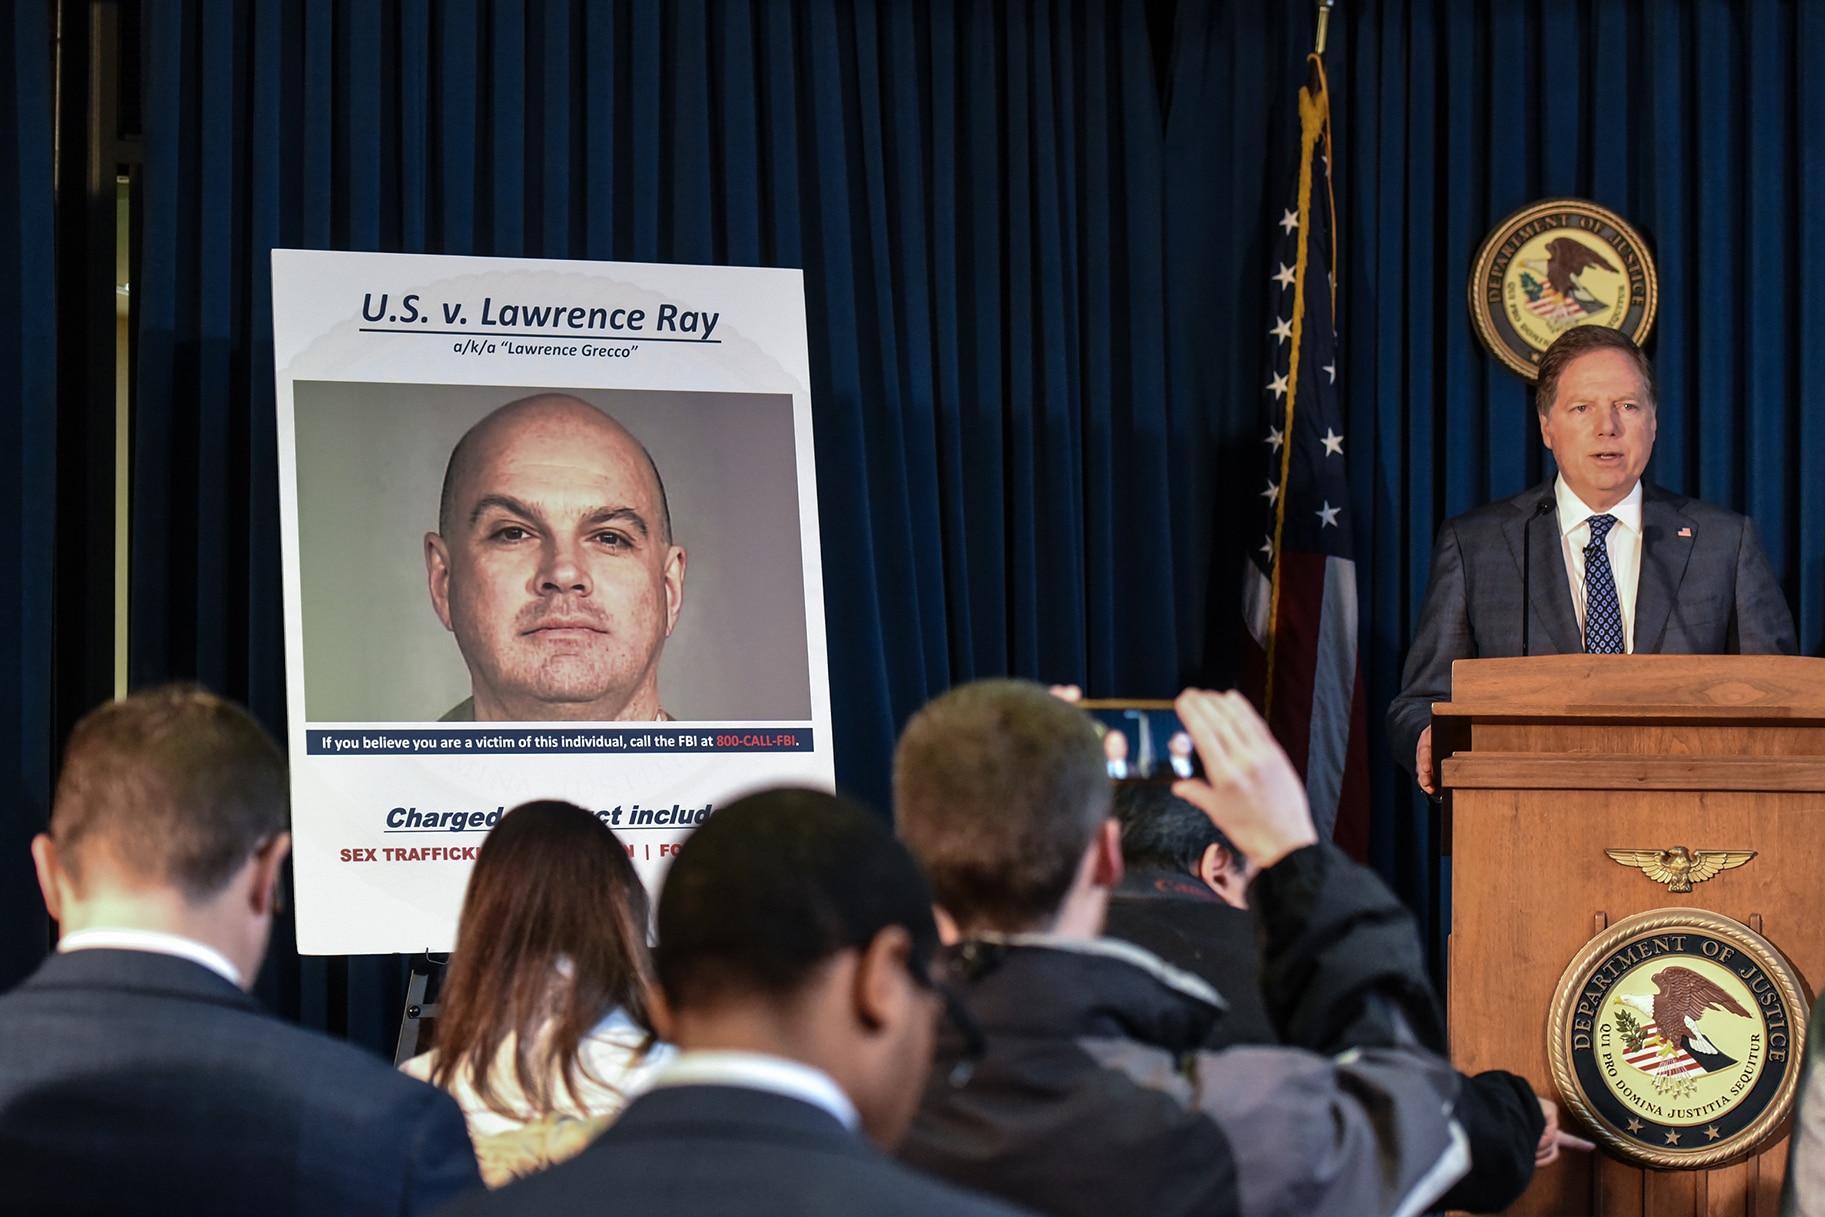 Geoffrey Berman announces the indictment against Lawrence Ray